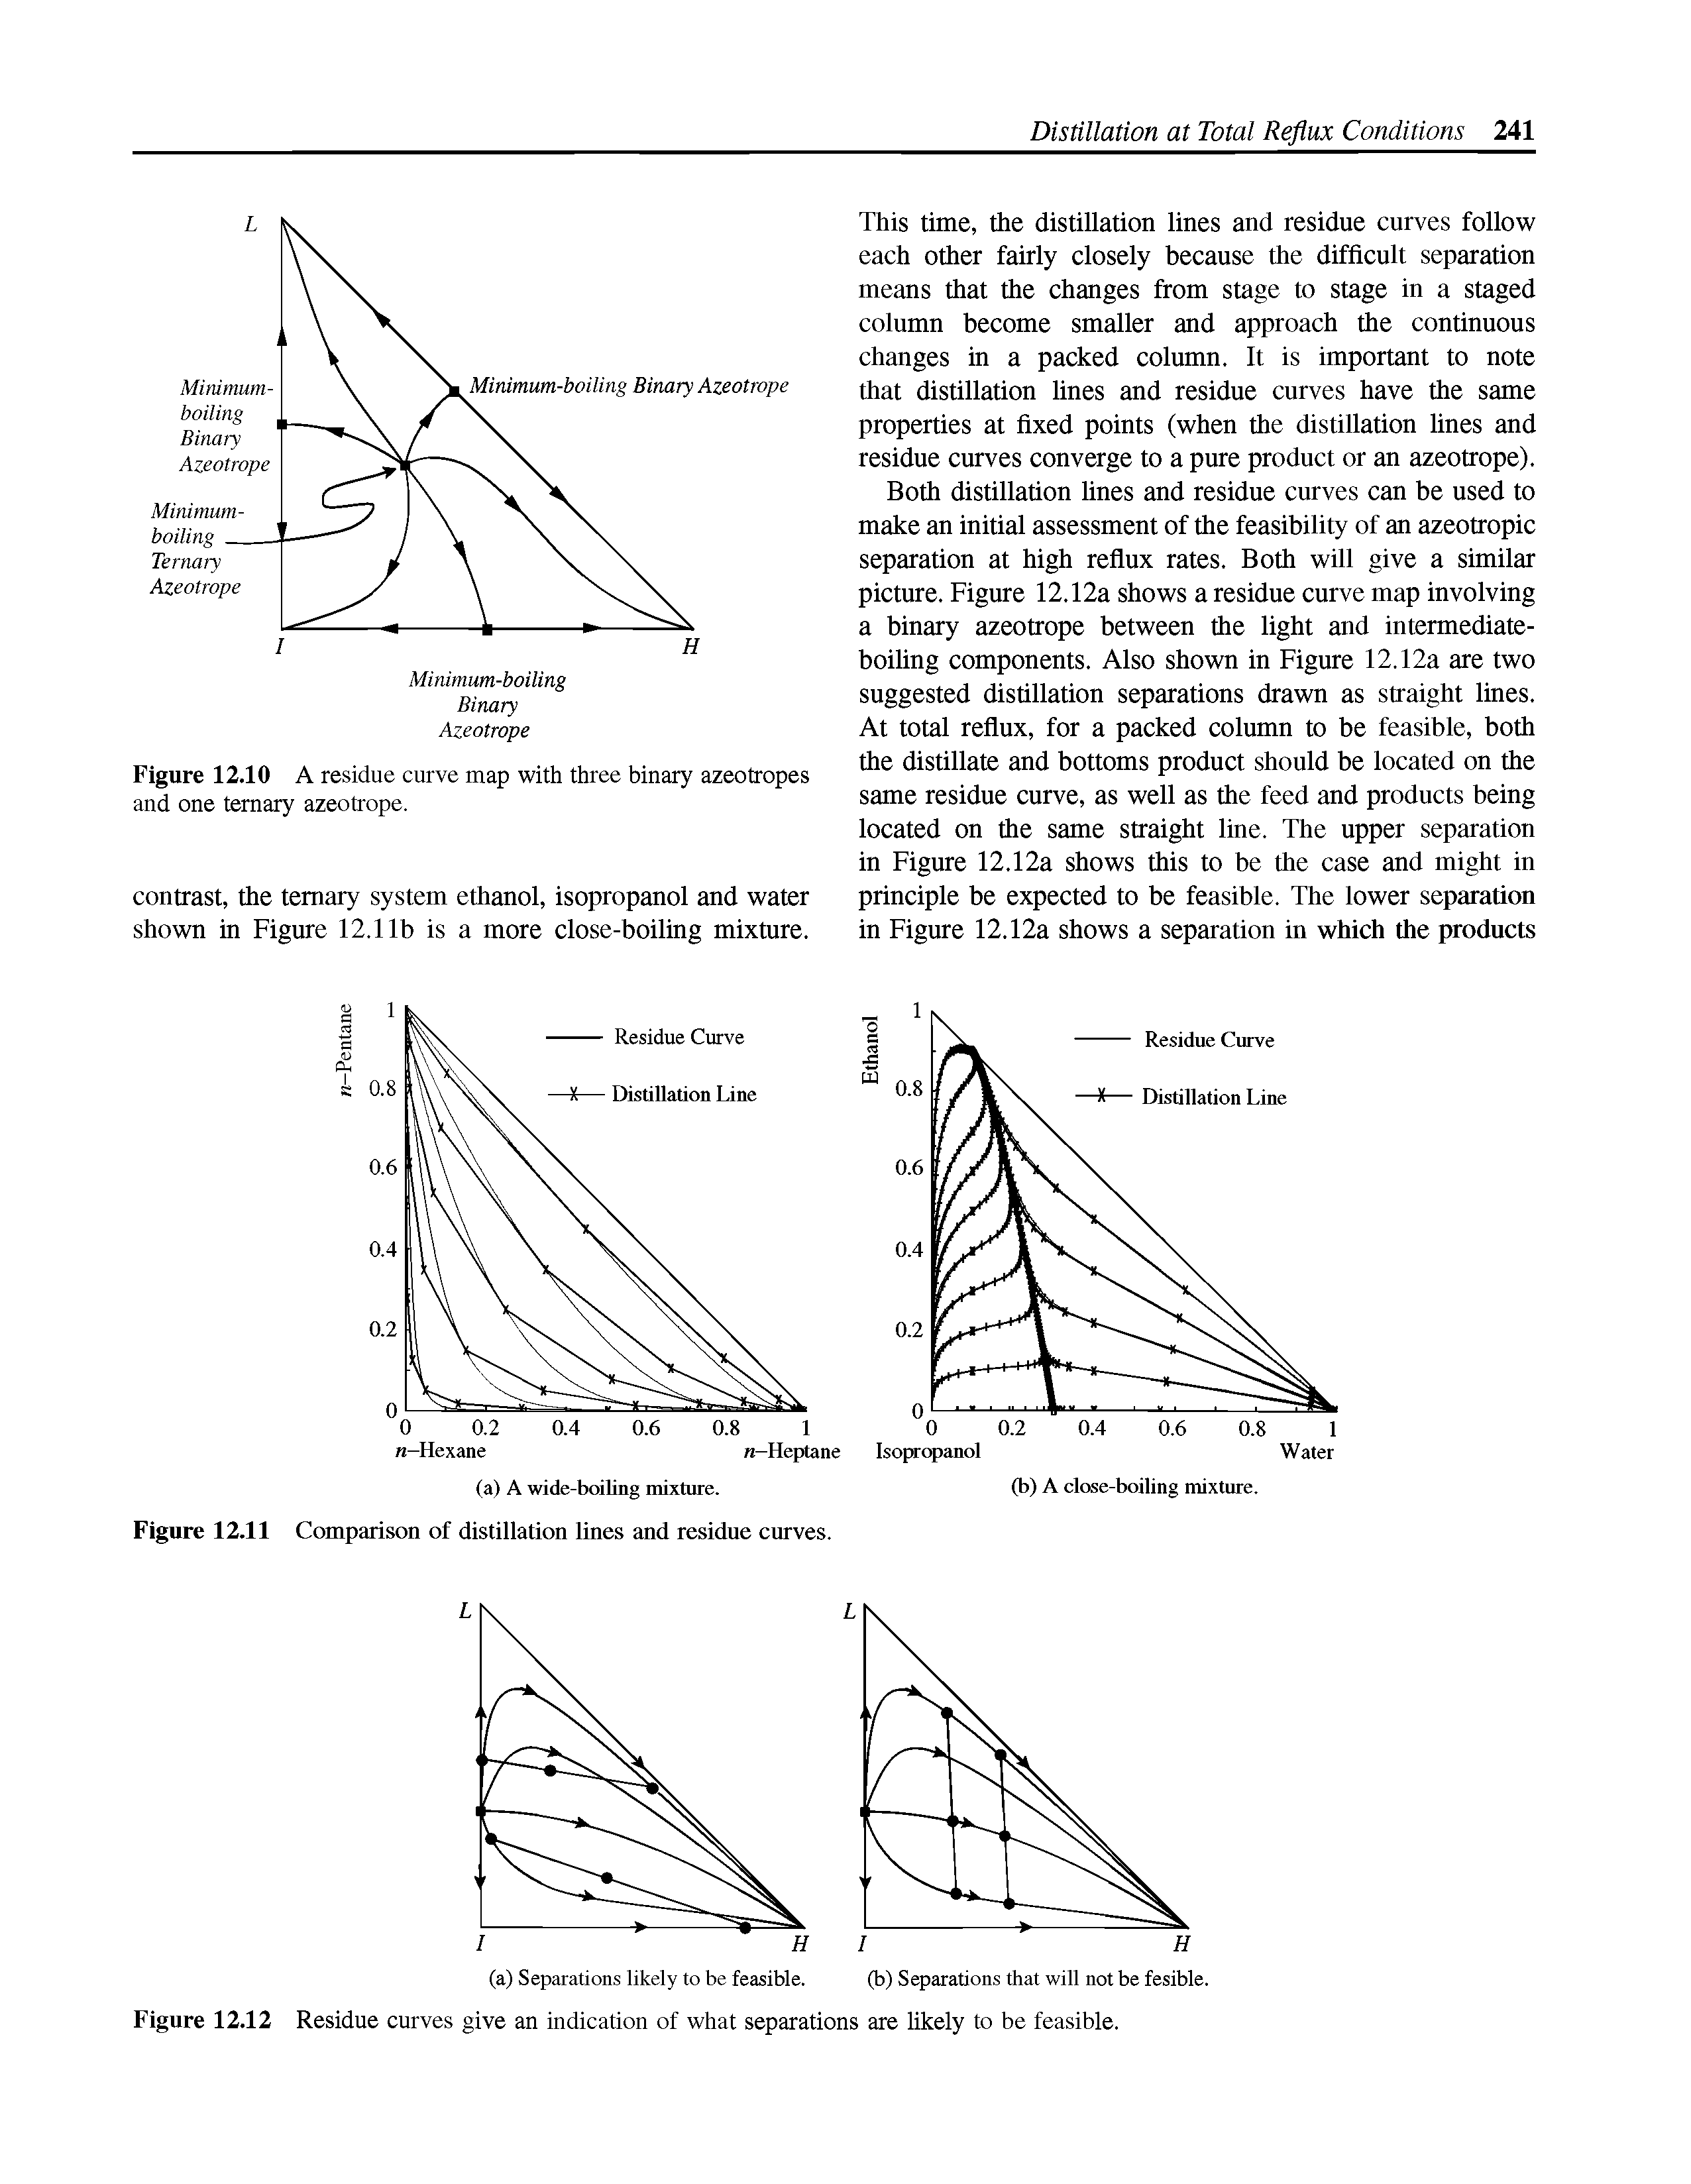 Figure 12.11 Comparison of distillation lines and residue curves.